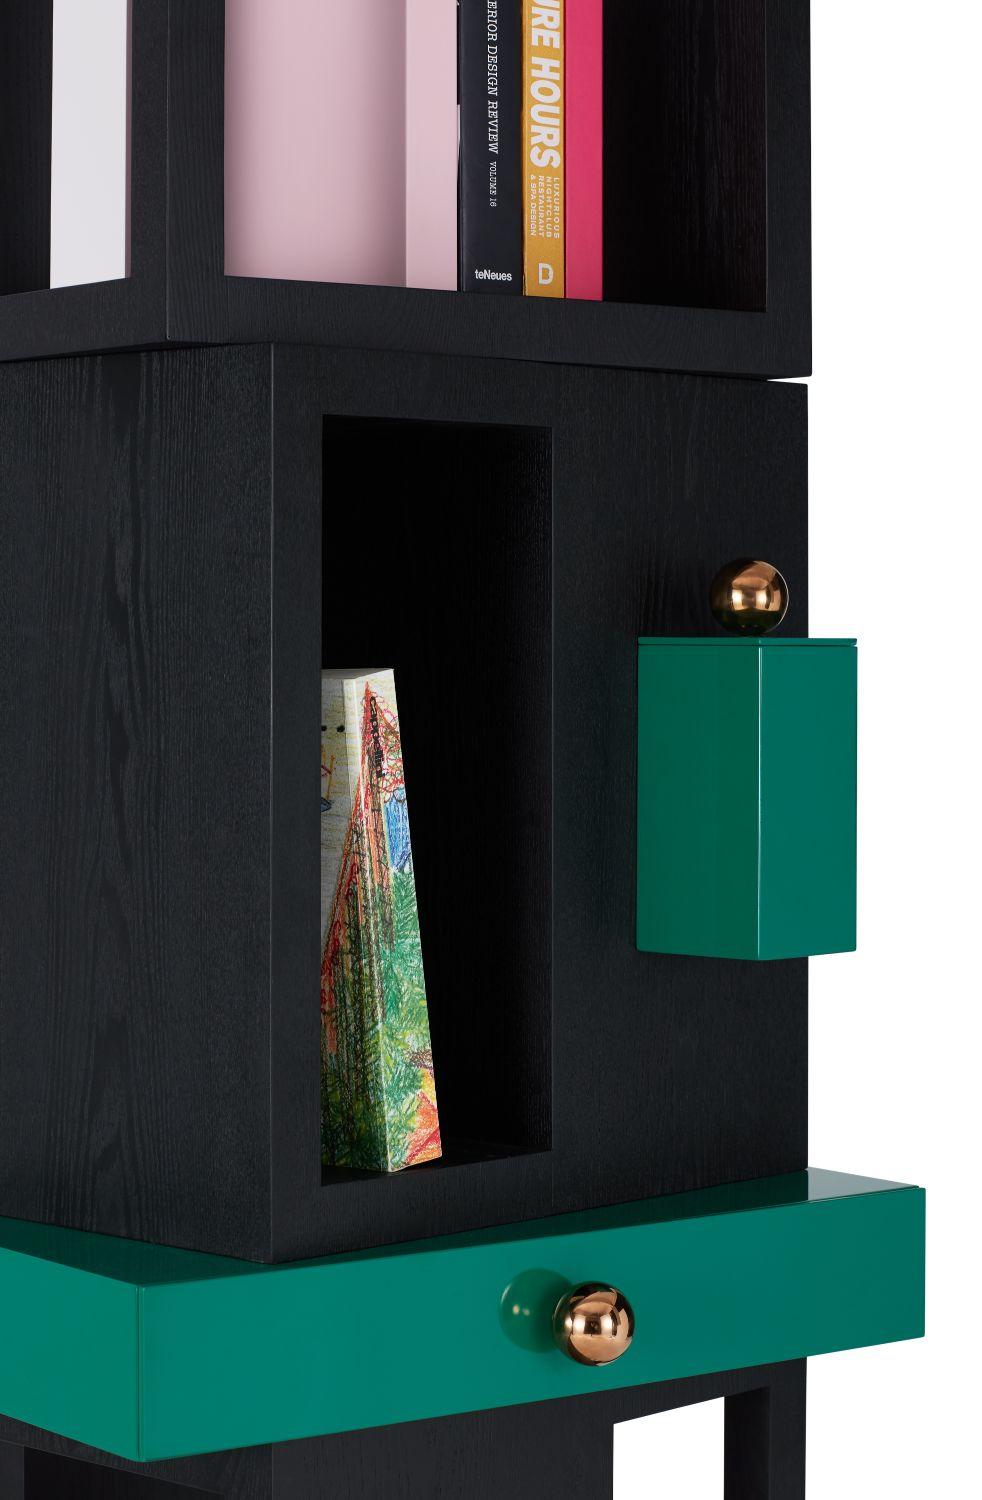 Colorful bookshelf designed by Thomas Dariel, Maison Dada
Measures: W 61 x D 60 x H 165 cm
Also available in taller version 218 cm
External shell in colored-stained ash veneer
Inside shelving painted in matte finish
Middle drawer painted in